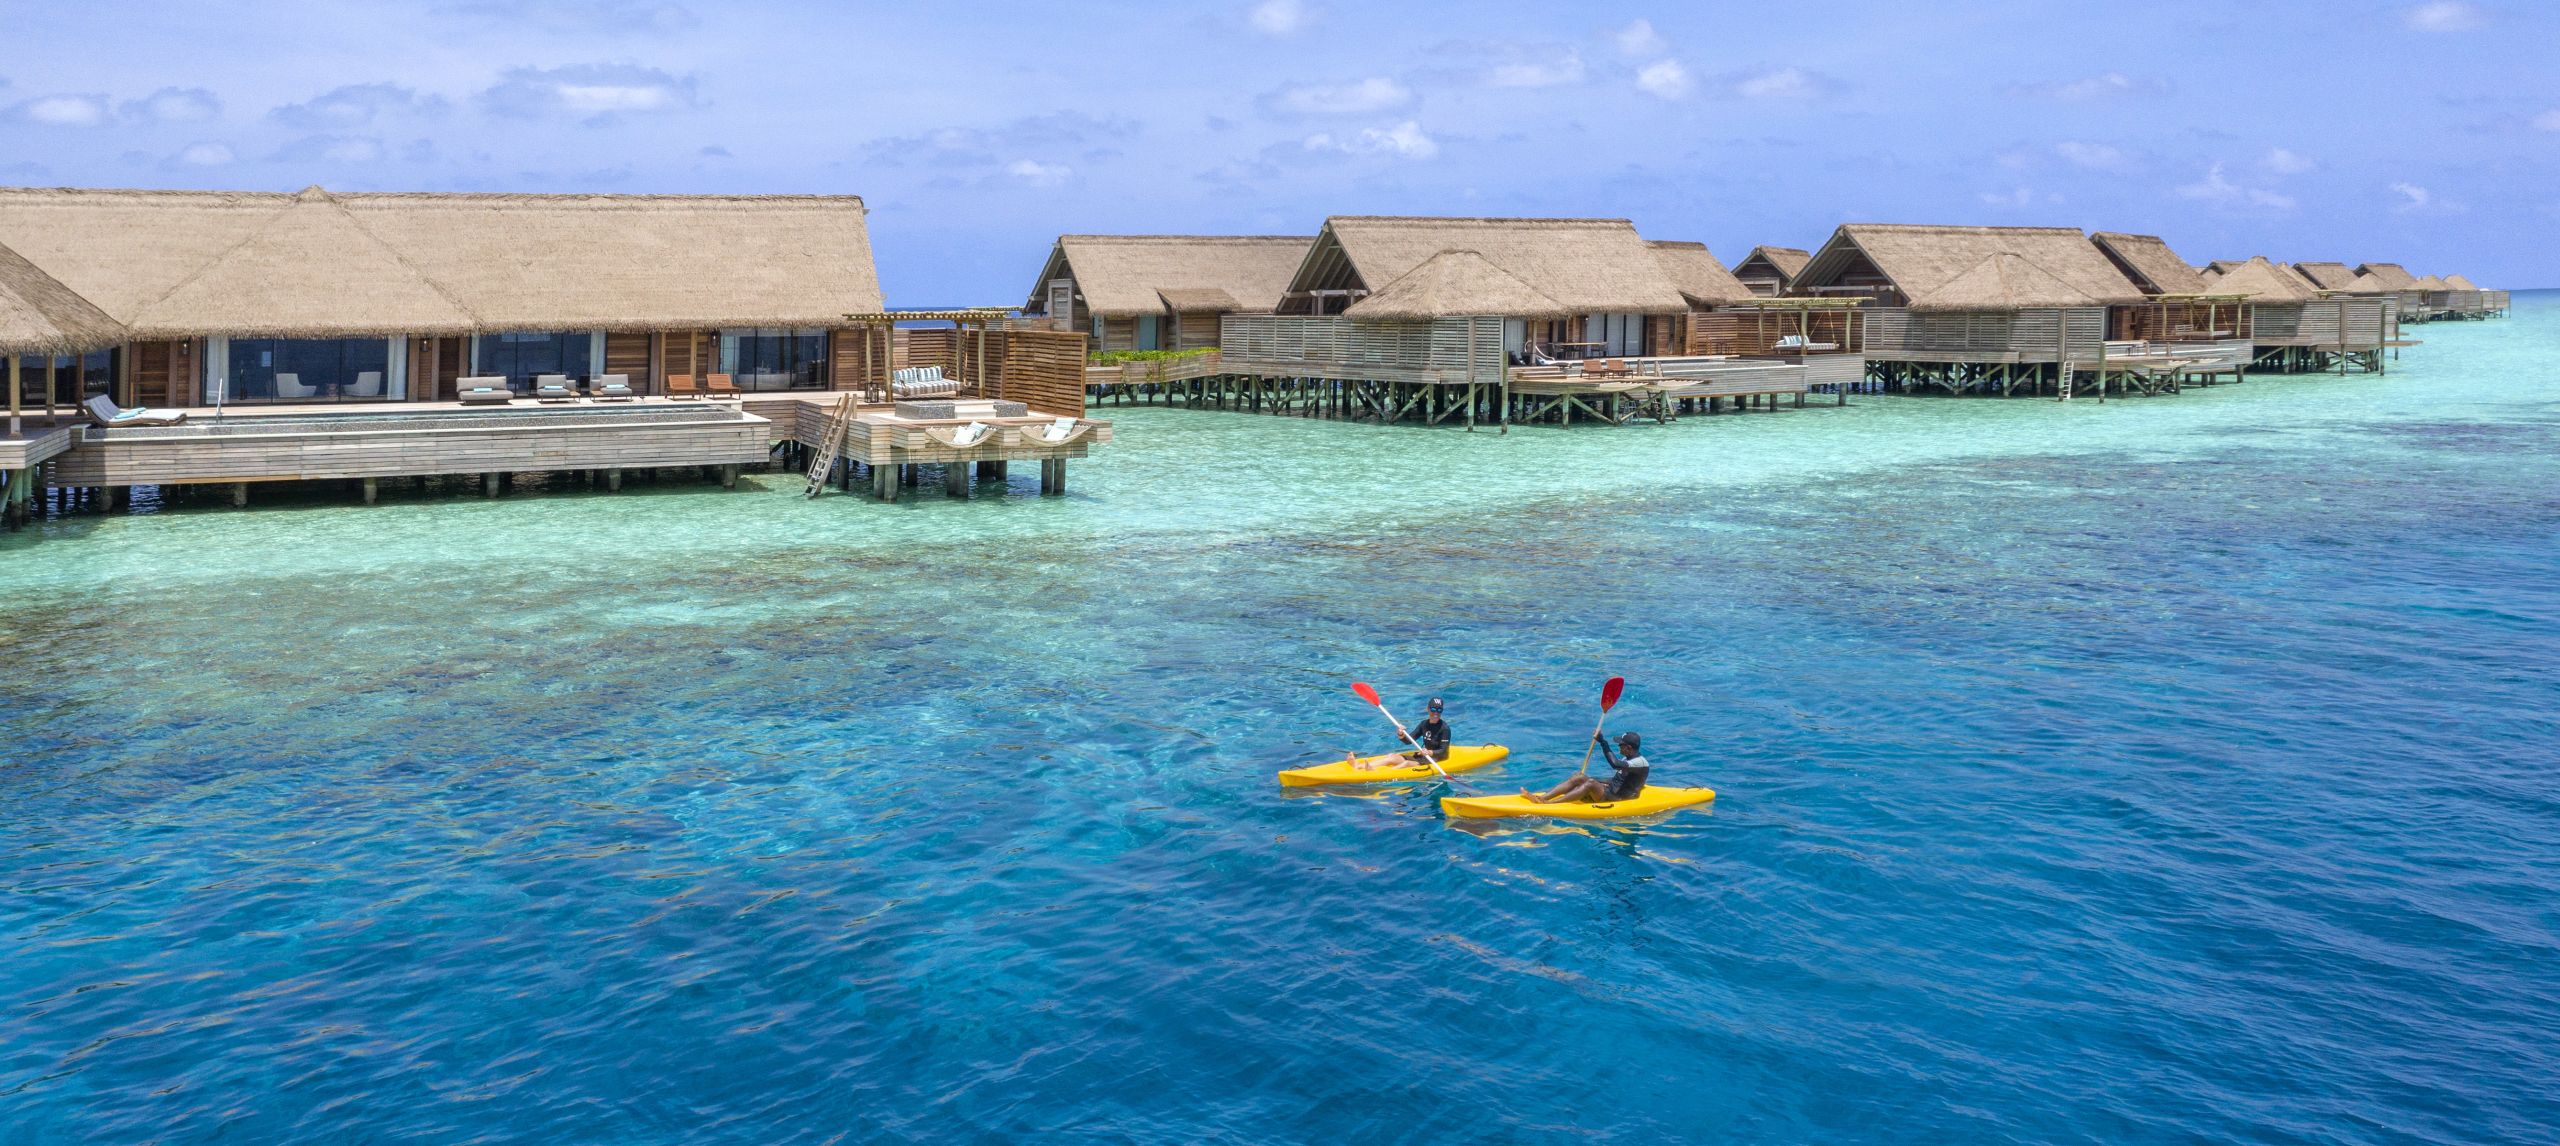 Two kayaks in lagoon with villas in the background